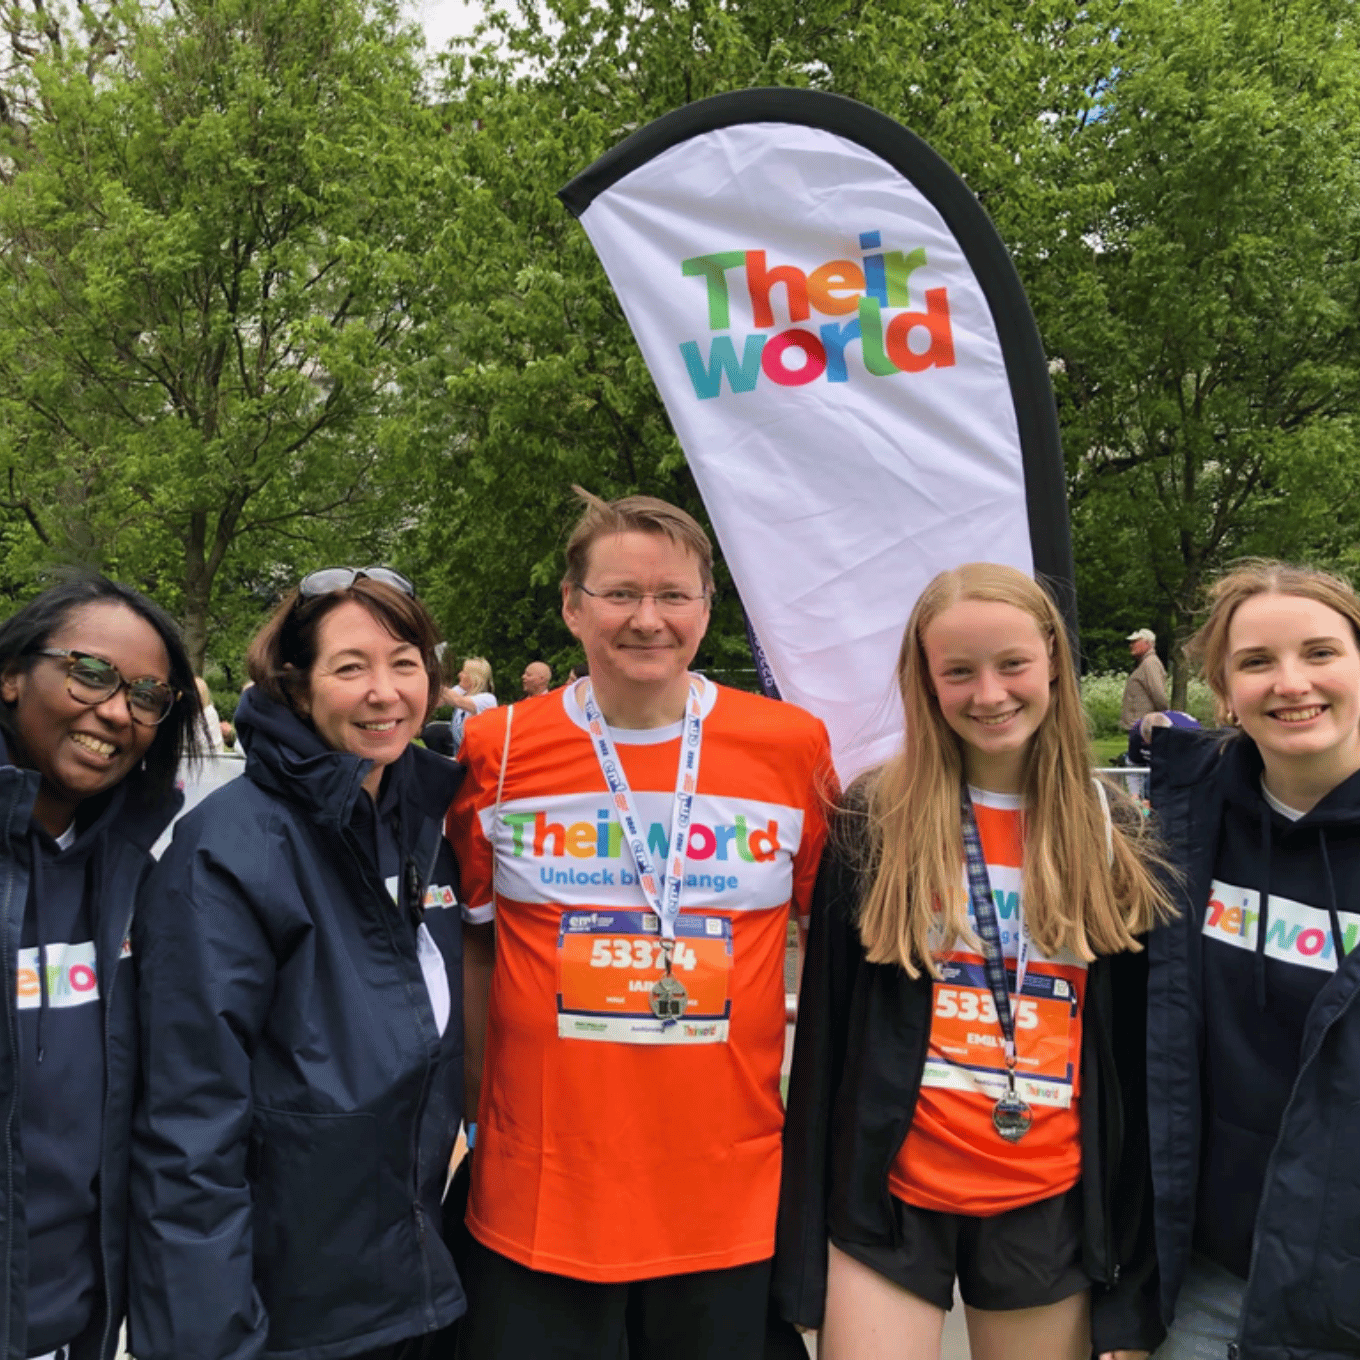 The fundraising team (Jess, Victoria and Emma) with Iain and Emily MacFarlane Runners at the Edinburgh Marathon Festival 2022